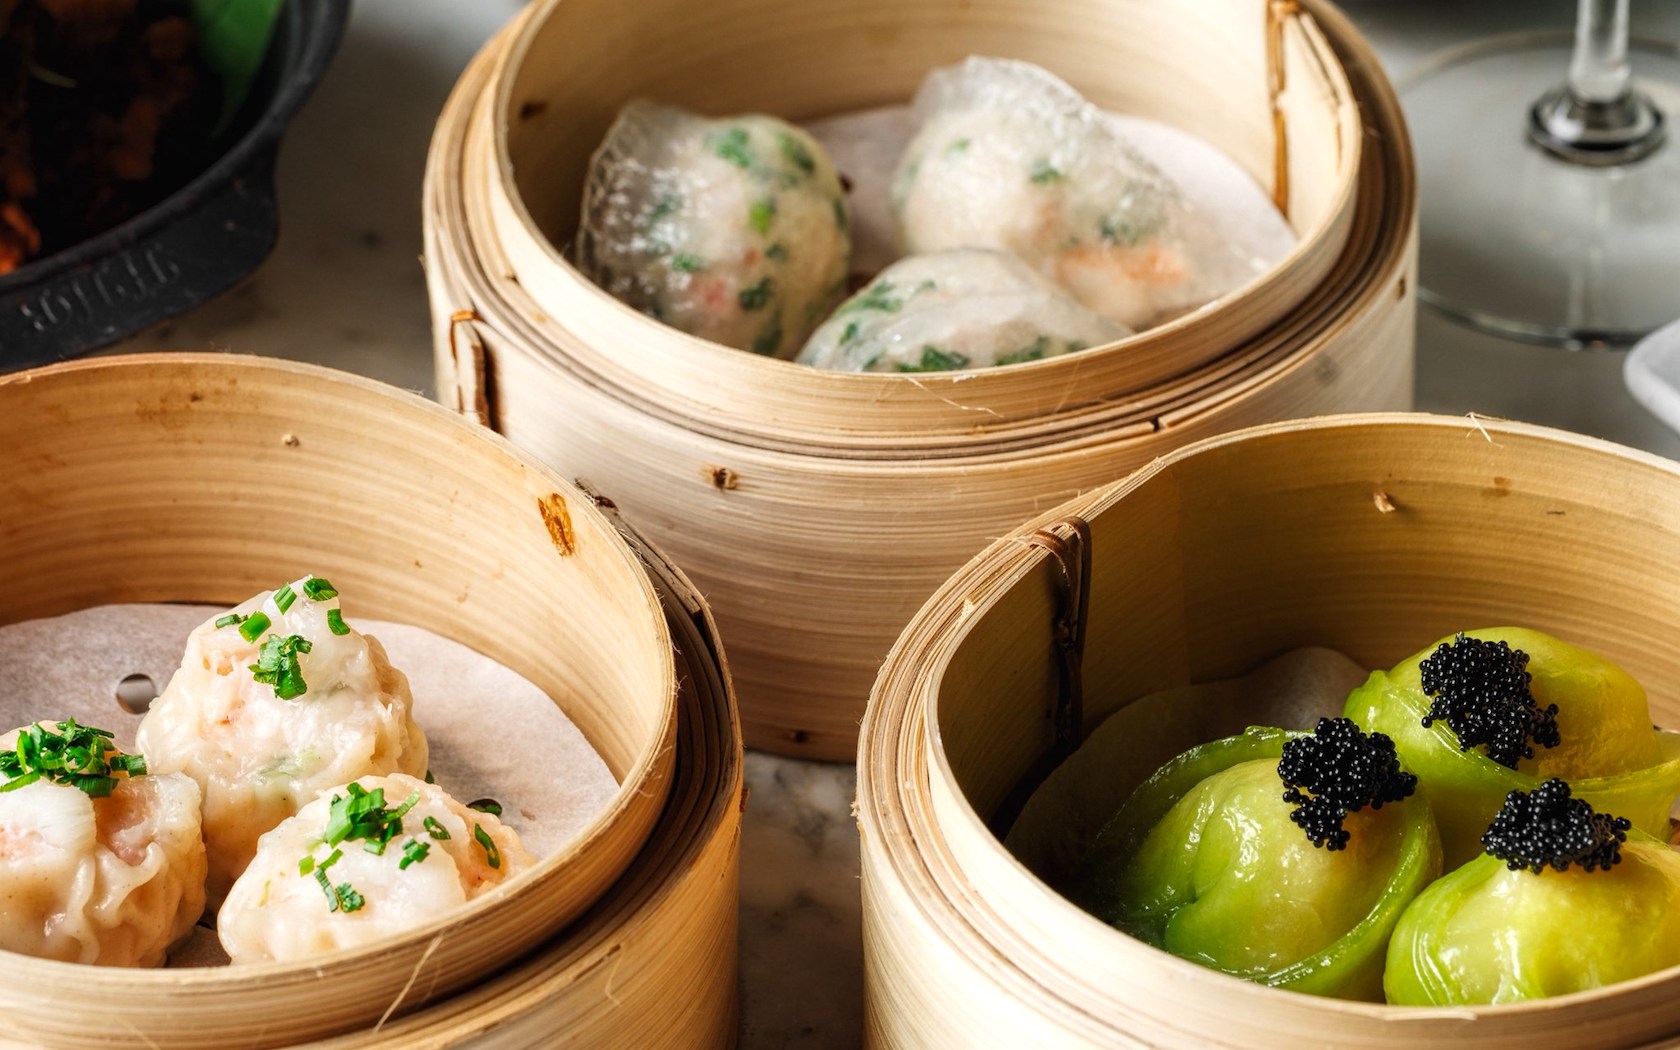 Get $1 Dumplings At This Rooftop Bar Every Monday Night In Sydney